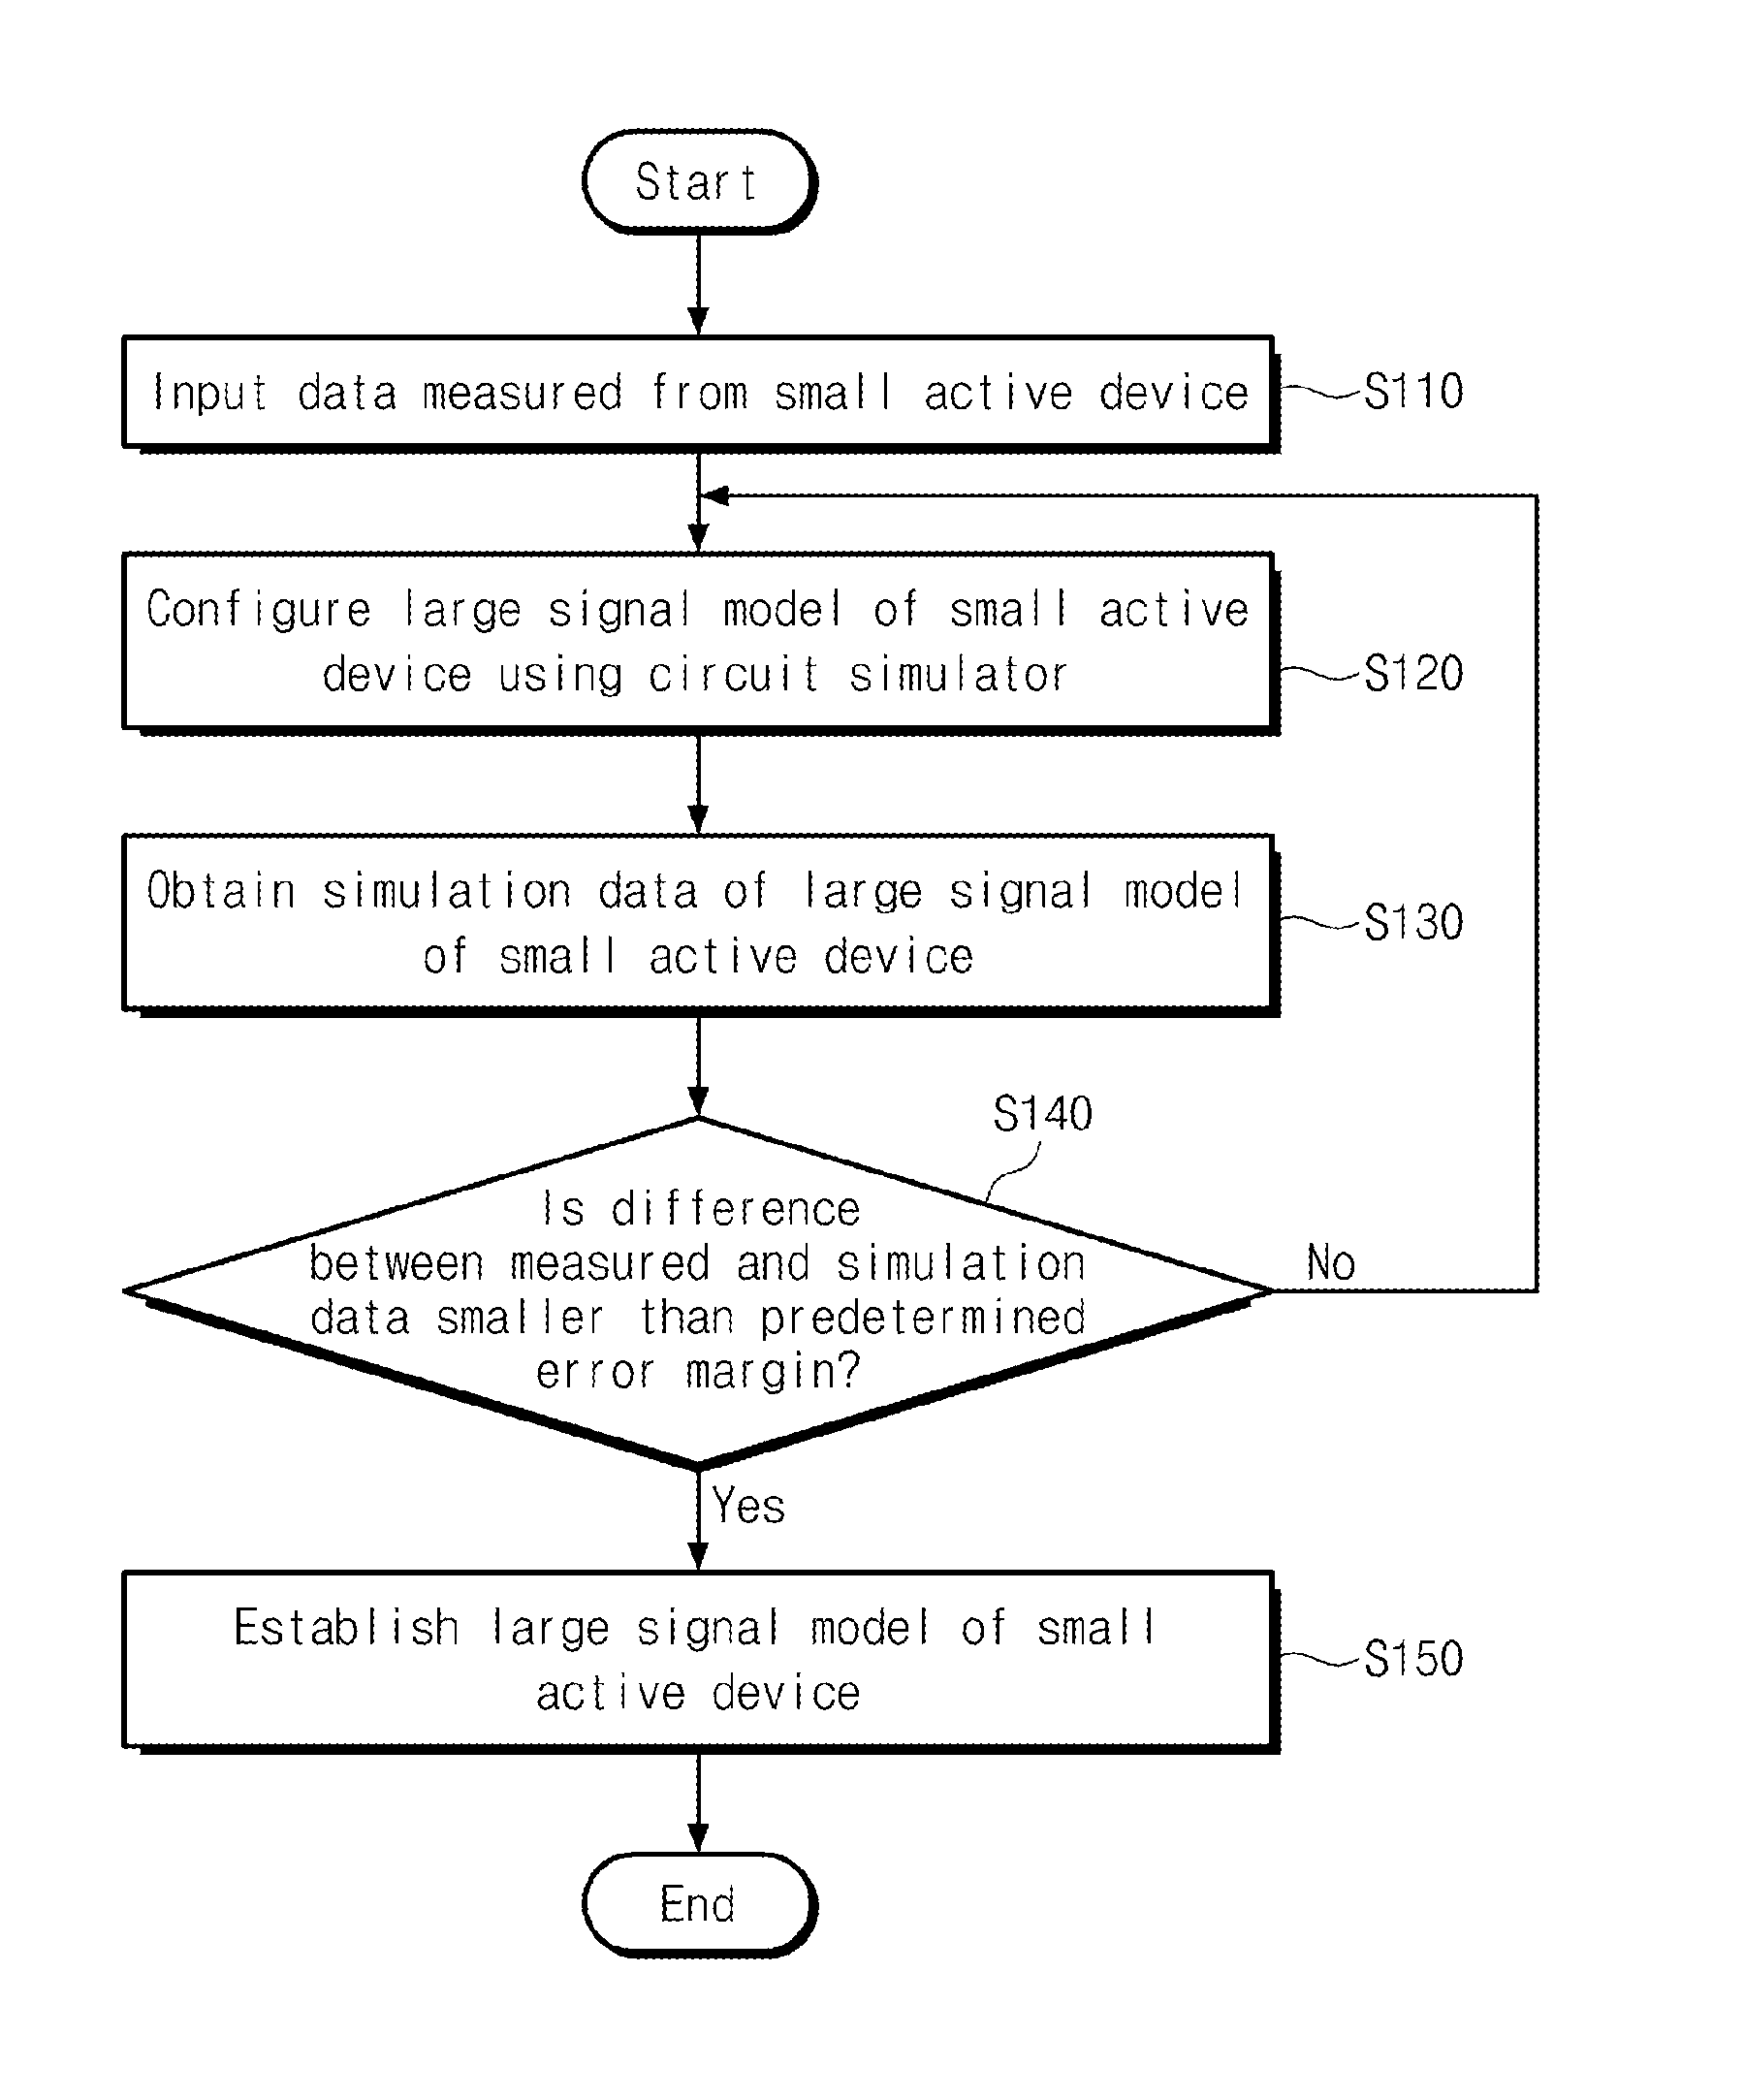 Method of configuring large signal model of active device